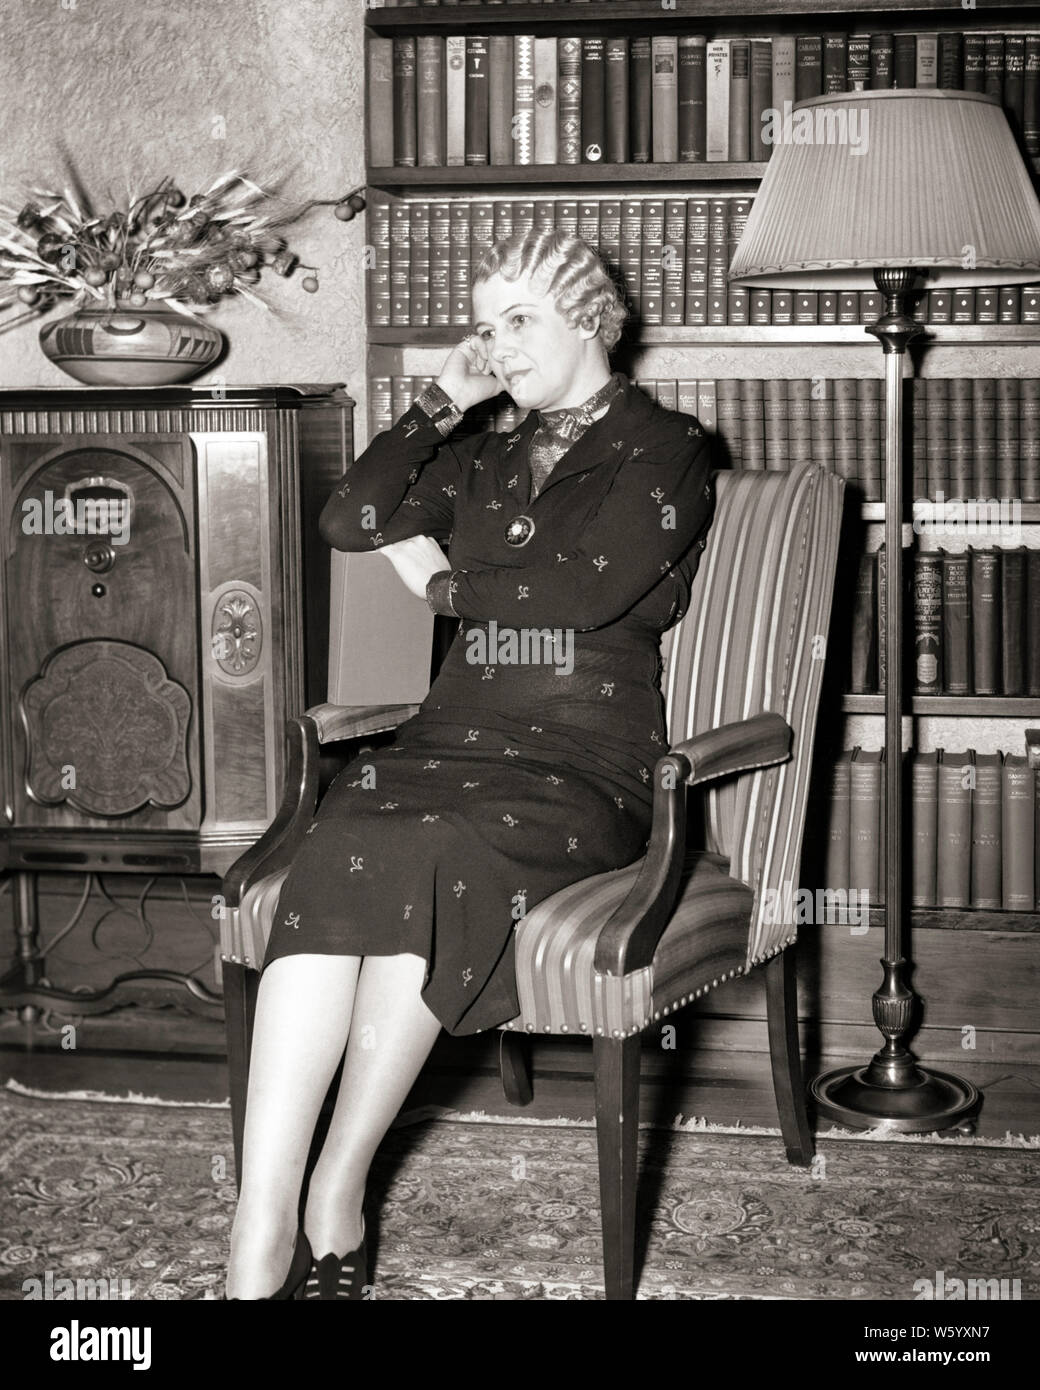 1930s MATURE WOMAN SITTING IN CHAIR LISTENING TO RADIO - r108 HAR001 HARS LEISURE AUDIO HAIRSTYLE MARCEL WAVE HOMES FINGER WAVES CONNECTION FLOOR LAMP RESIDENCE STYLISH BLACK AND WHITE CAUCASIAN ETHNICITY HAR001 OLD FASHIONED Stock Photo